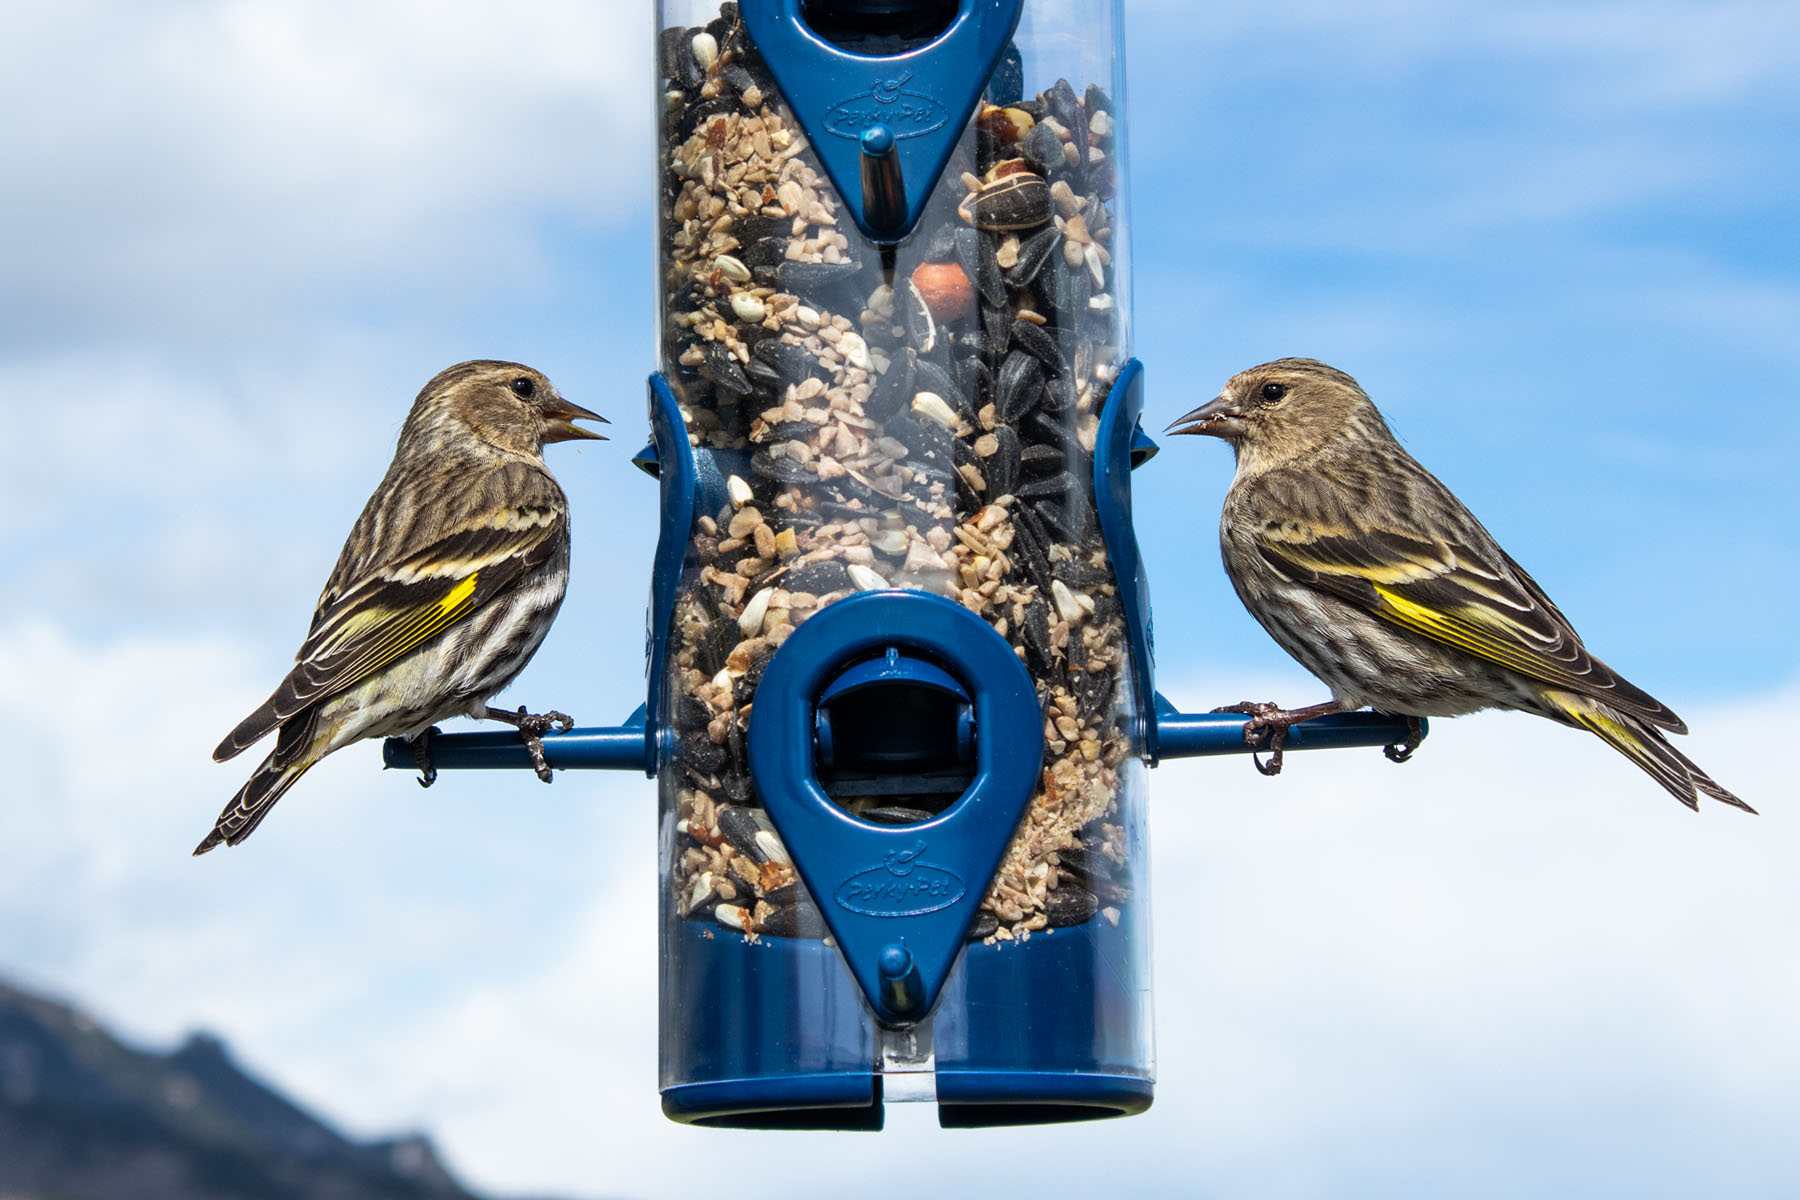 Goldfinches.  Click for next photo.